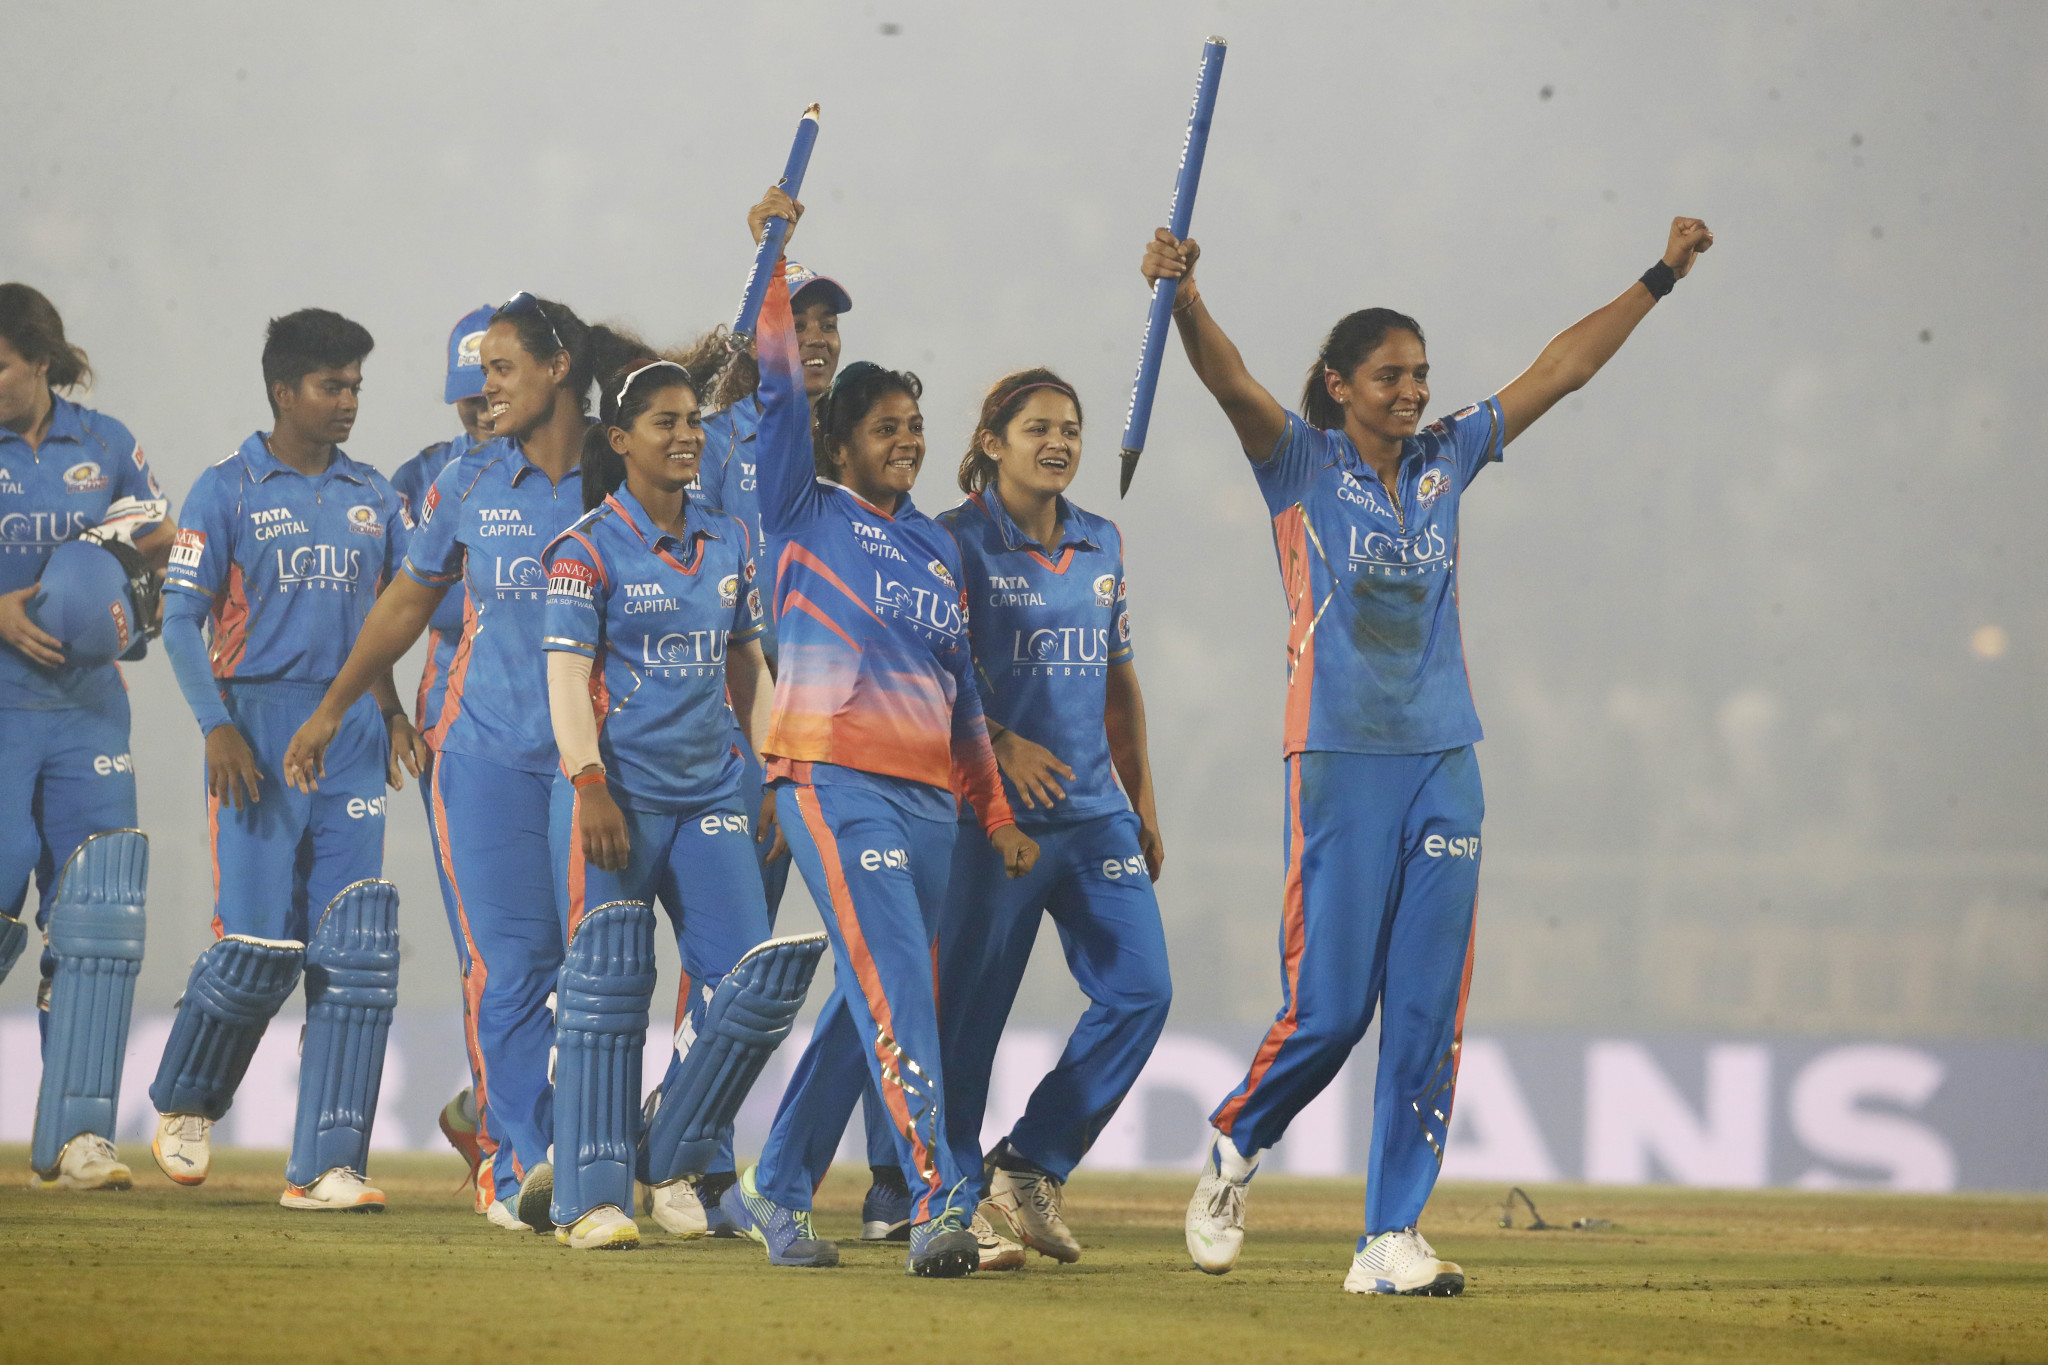 Harmanpreet Kaur led the Mumbai Indians to victory in the Women's Indian Premier League earlier this year and is one of the world's best female cricketers ©Getty Images